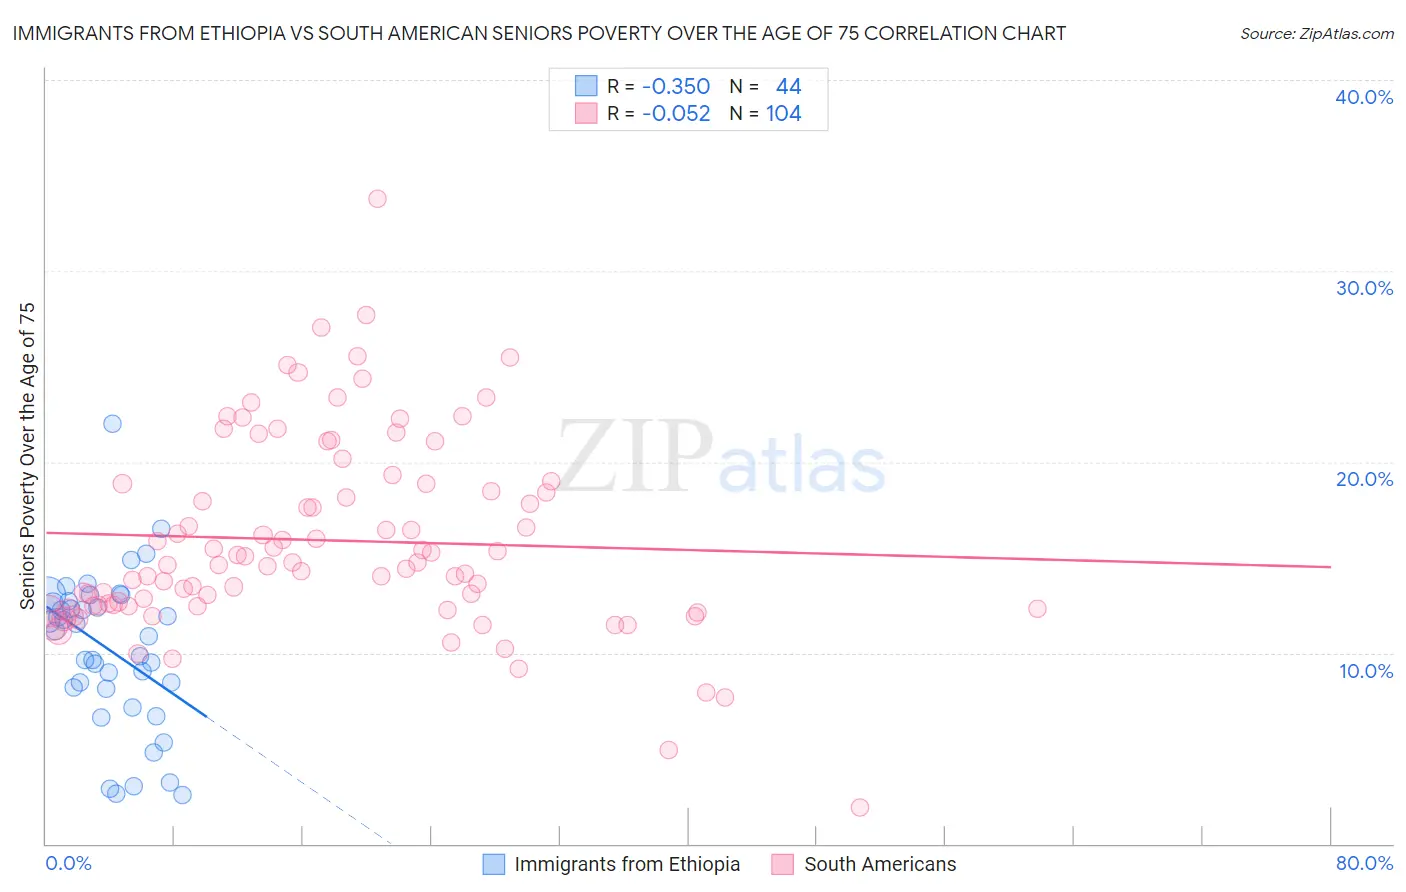 Immigrants from Ethiopia vs South American Seniors Poverty Over the Age of 75